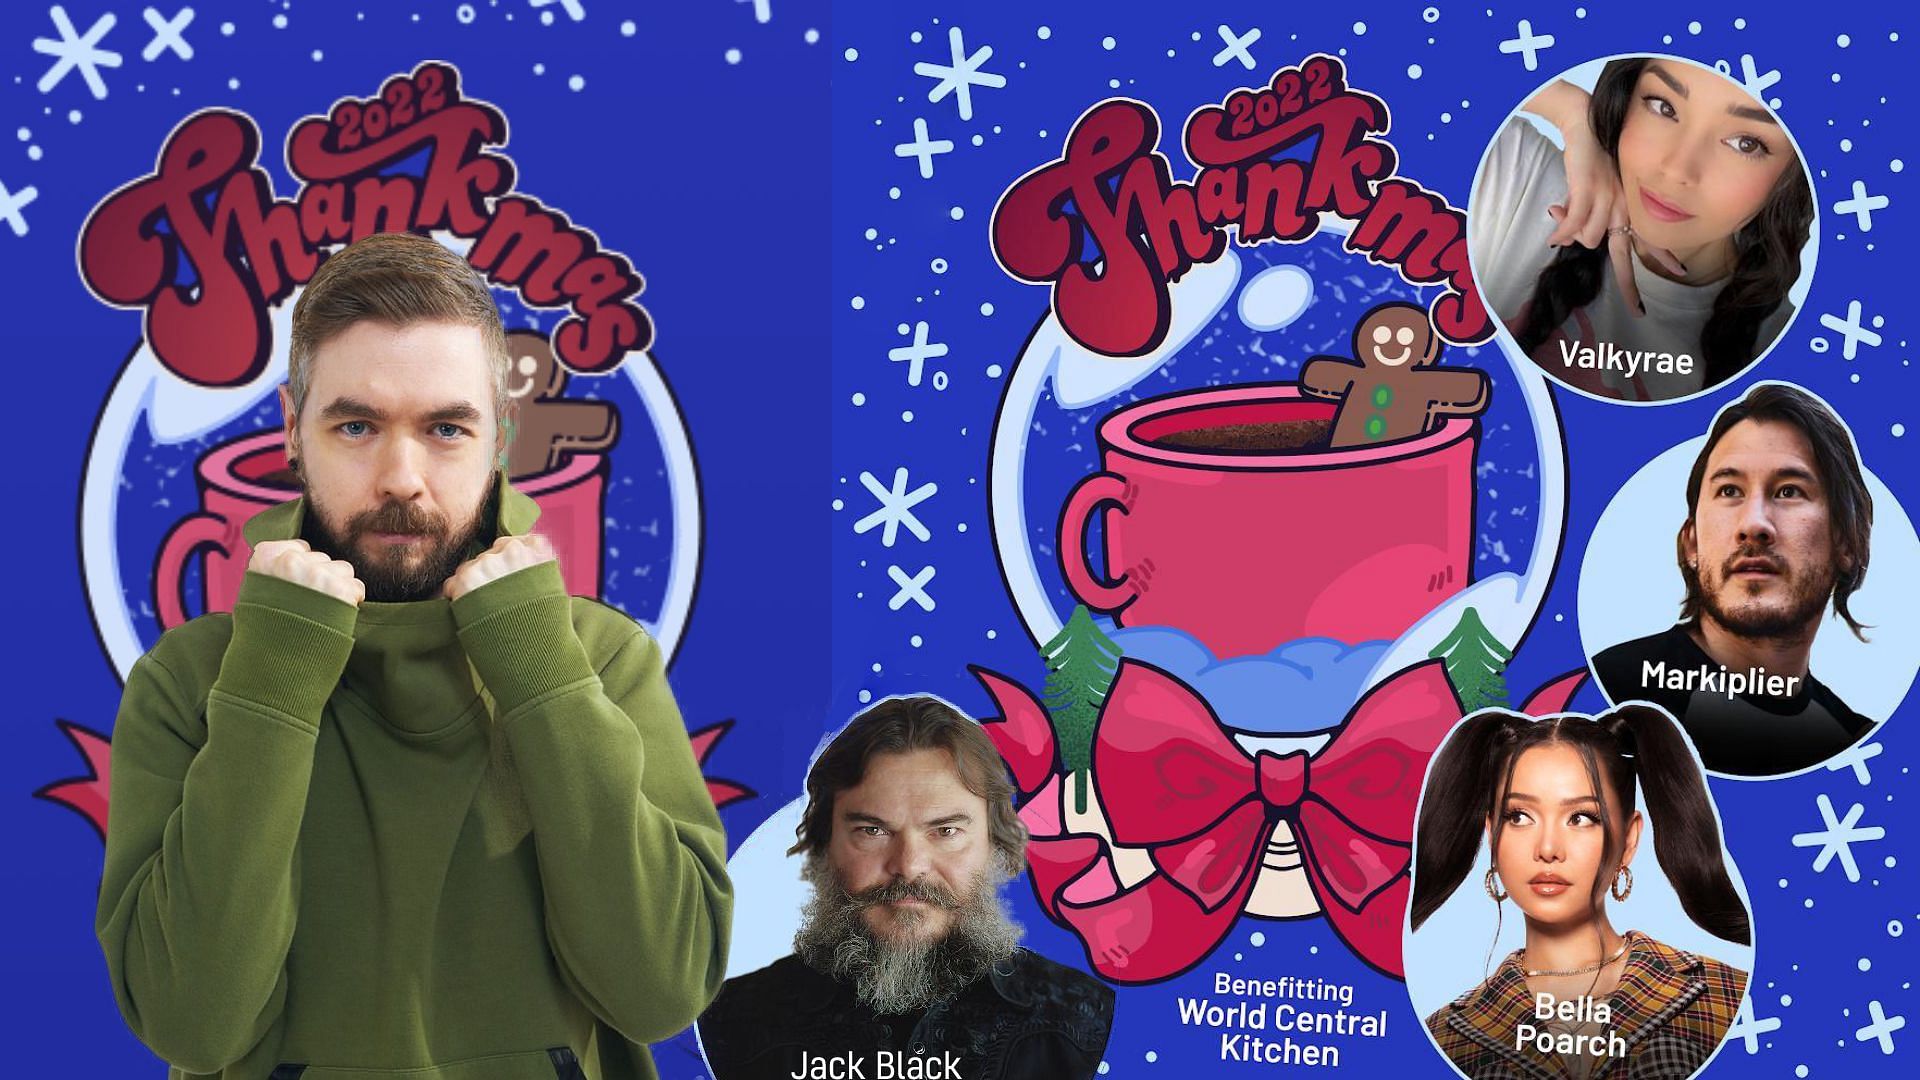 Thankmas JackSepticEye reveals celebrity guest list for this years Thankmas fundraiser, including Bella Poarch, Jack Black, Valkyrae, and others